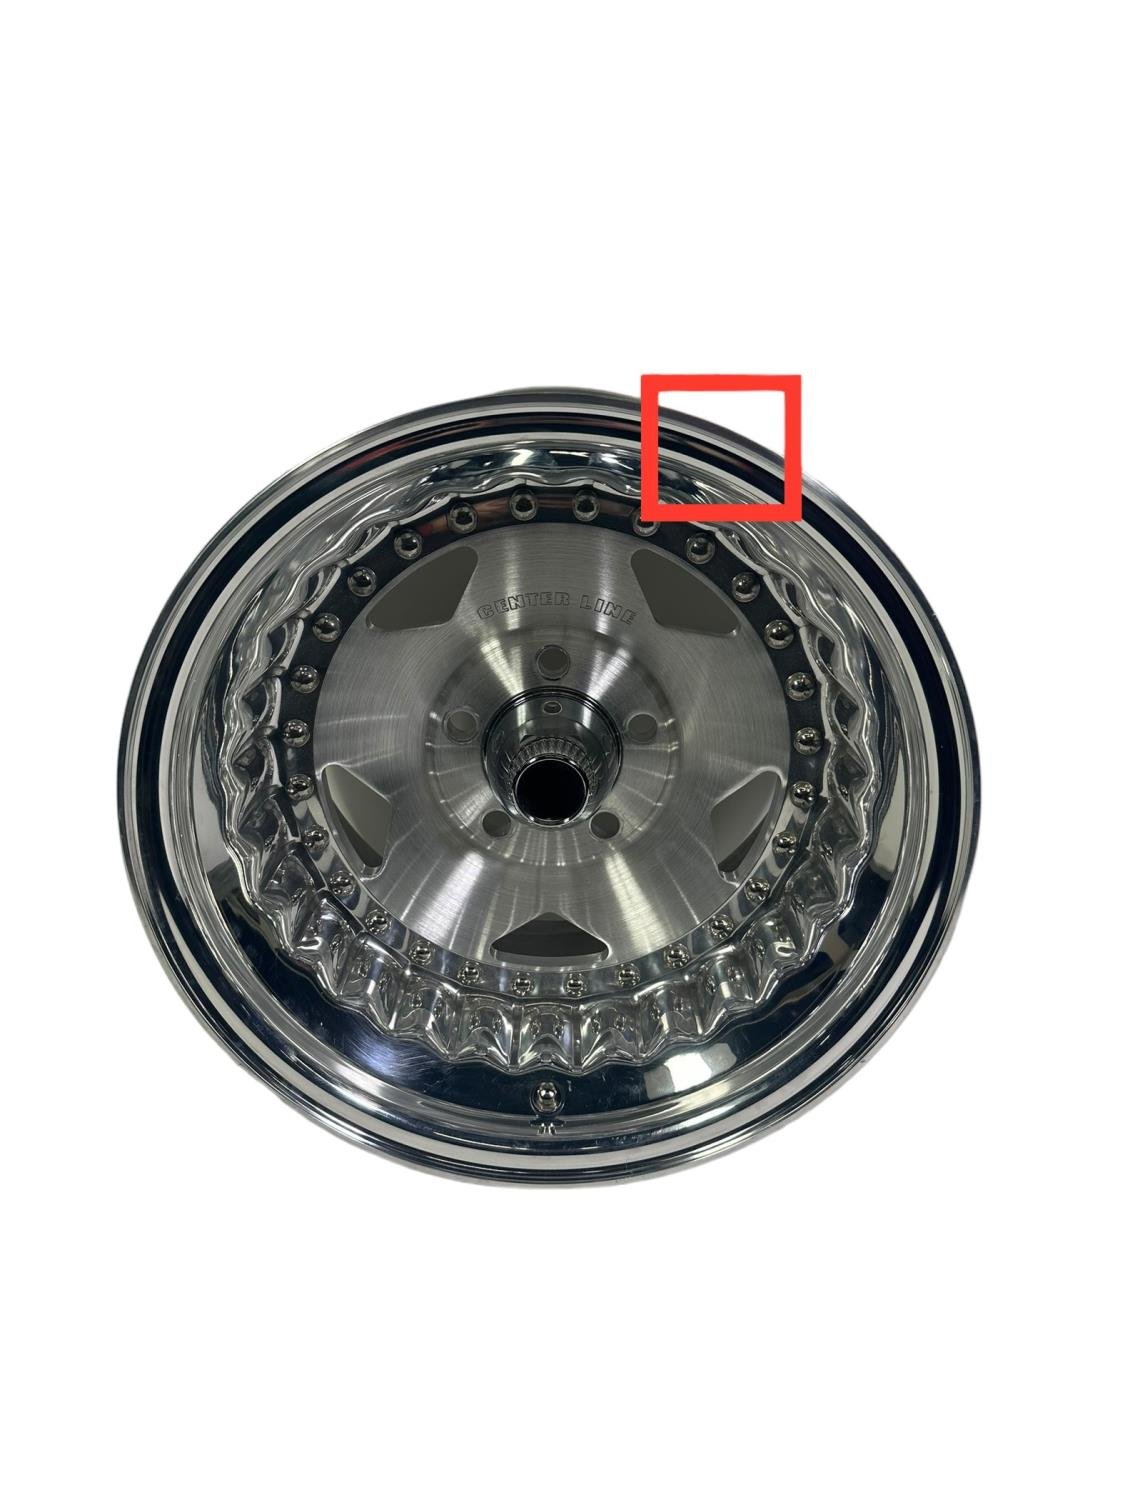 *Blemished Convo Pro Series Wheel Size: 15" x 10"